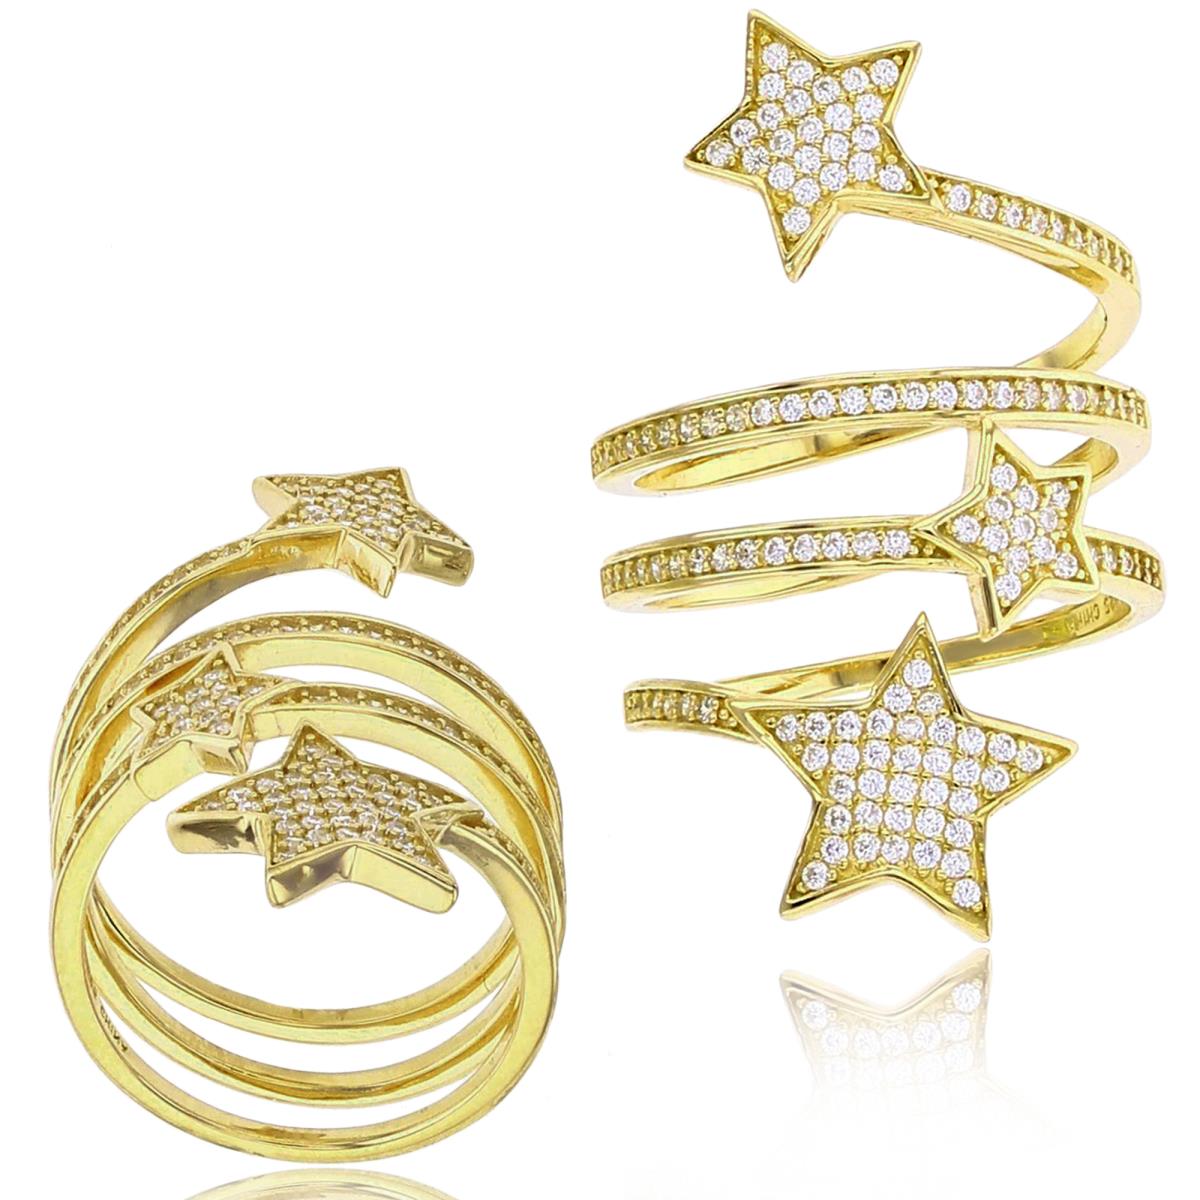 Sterling Silver+1Micron Yellow Gold Rnd White CZ Stars Spiral Ring